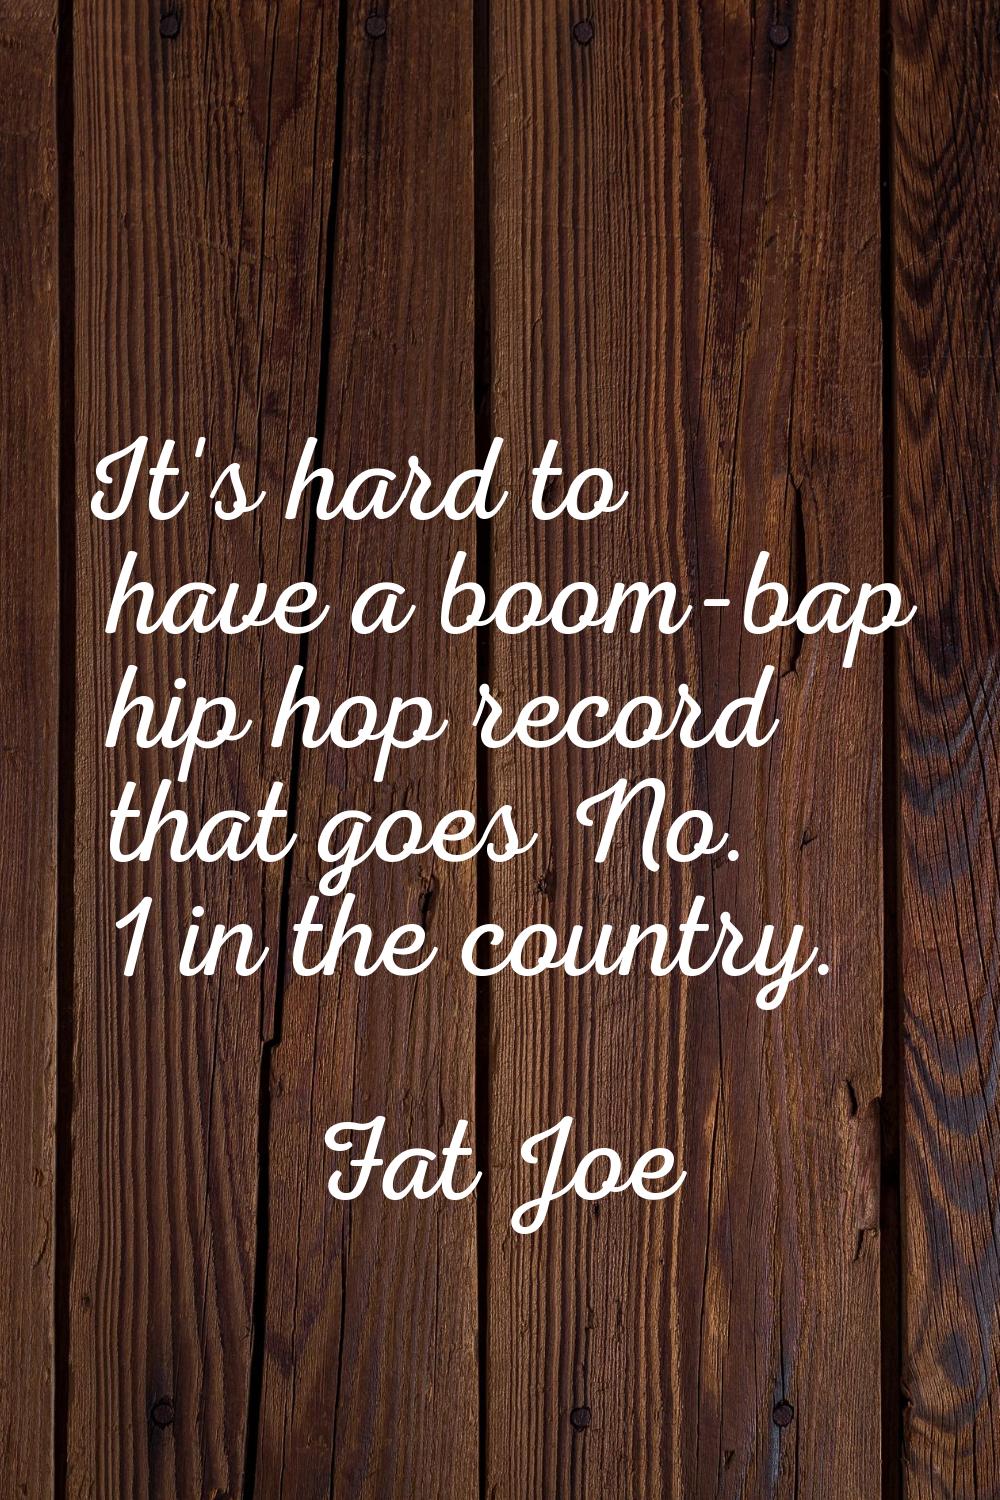 It's hard to have a boom-bap hip hop record that goes No. 1 in the country.